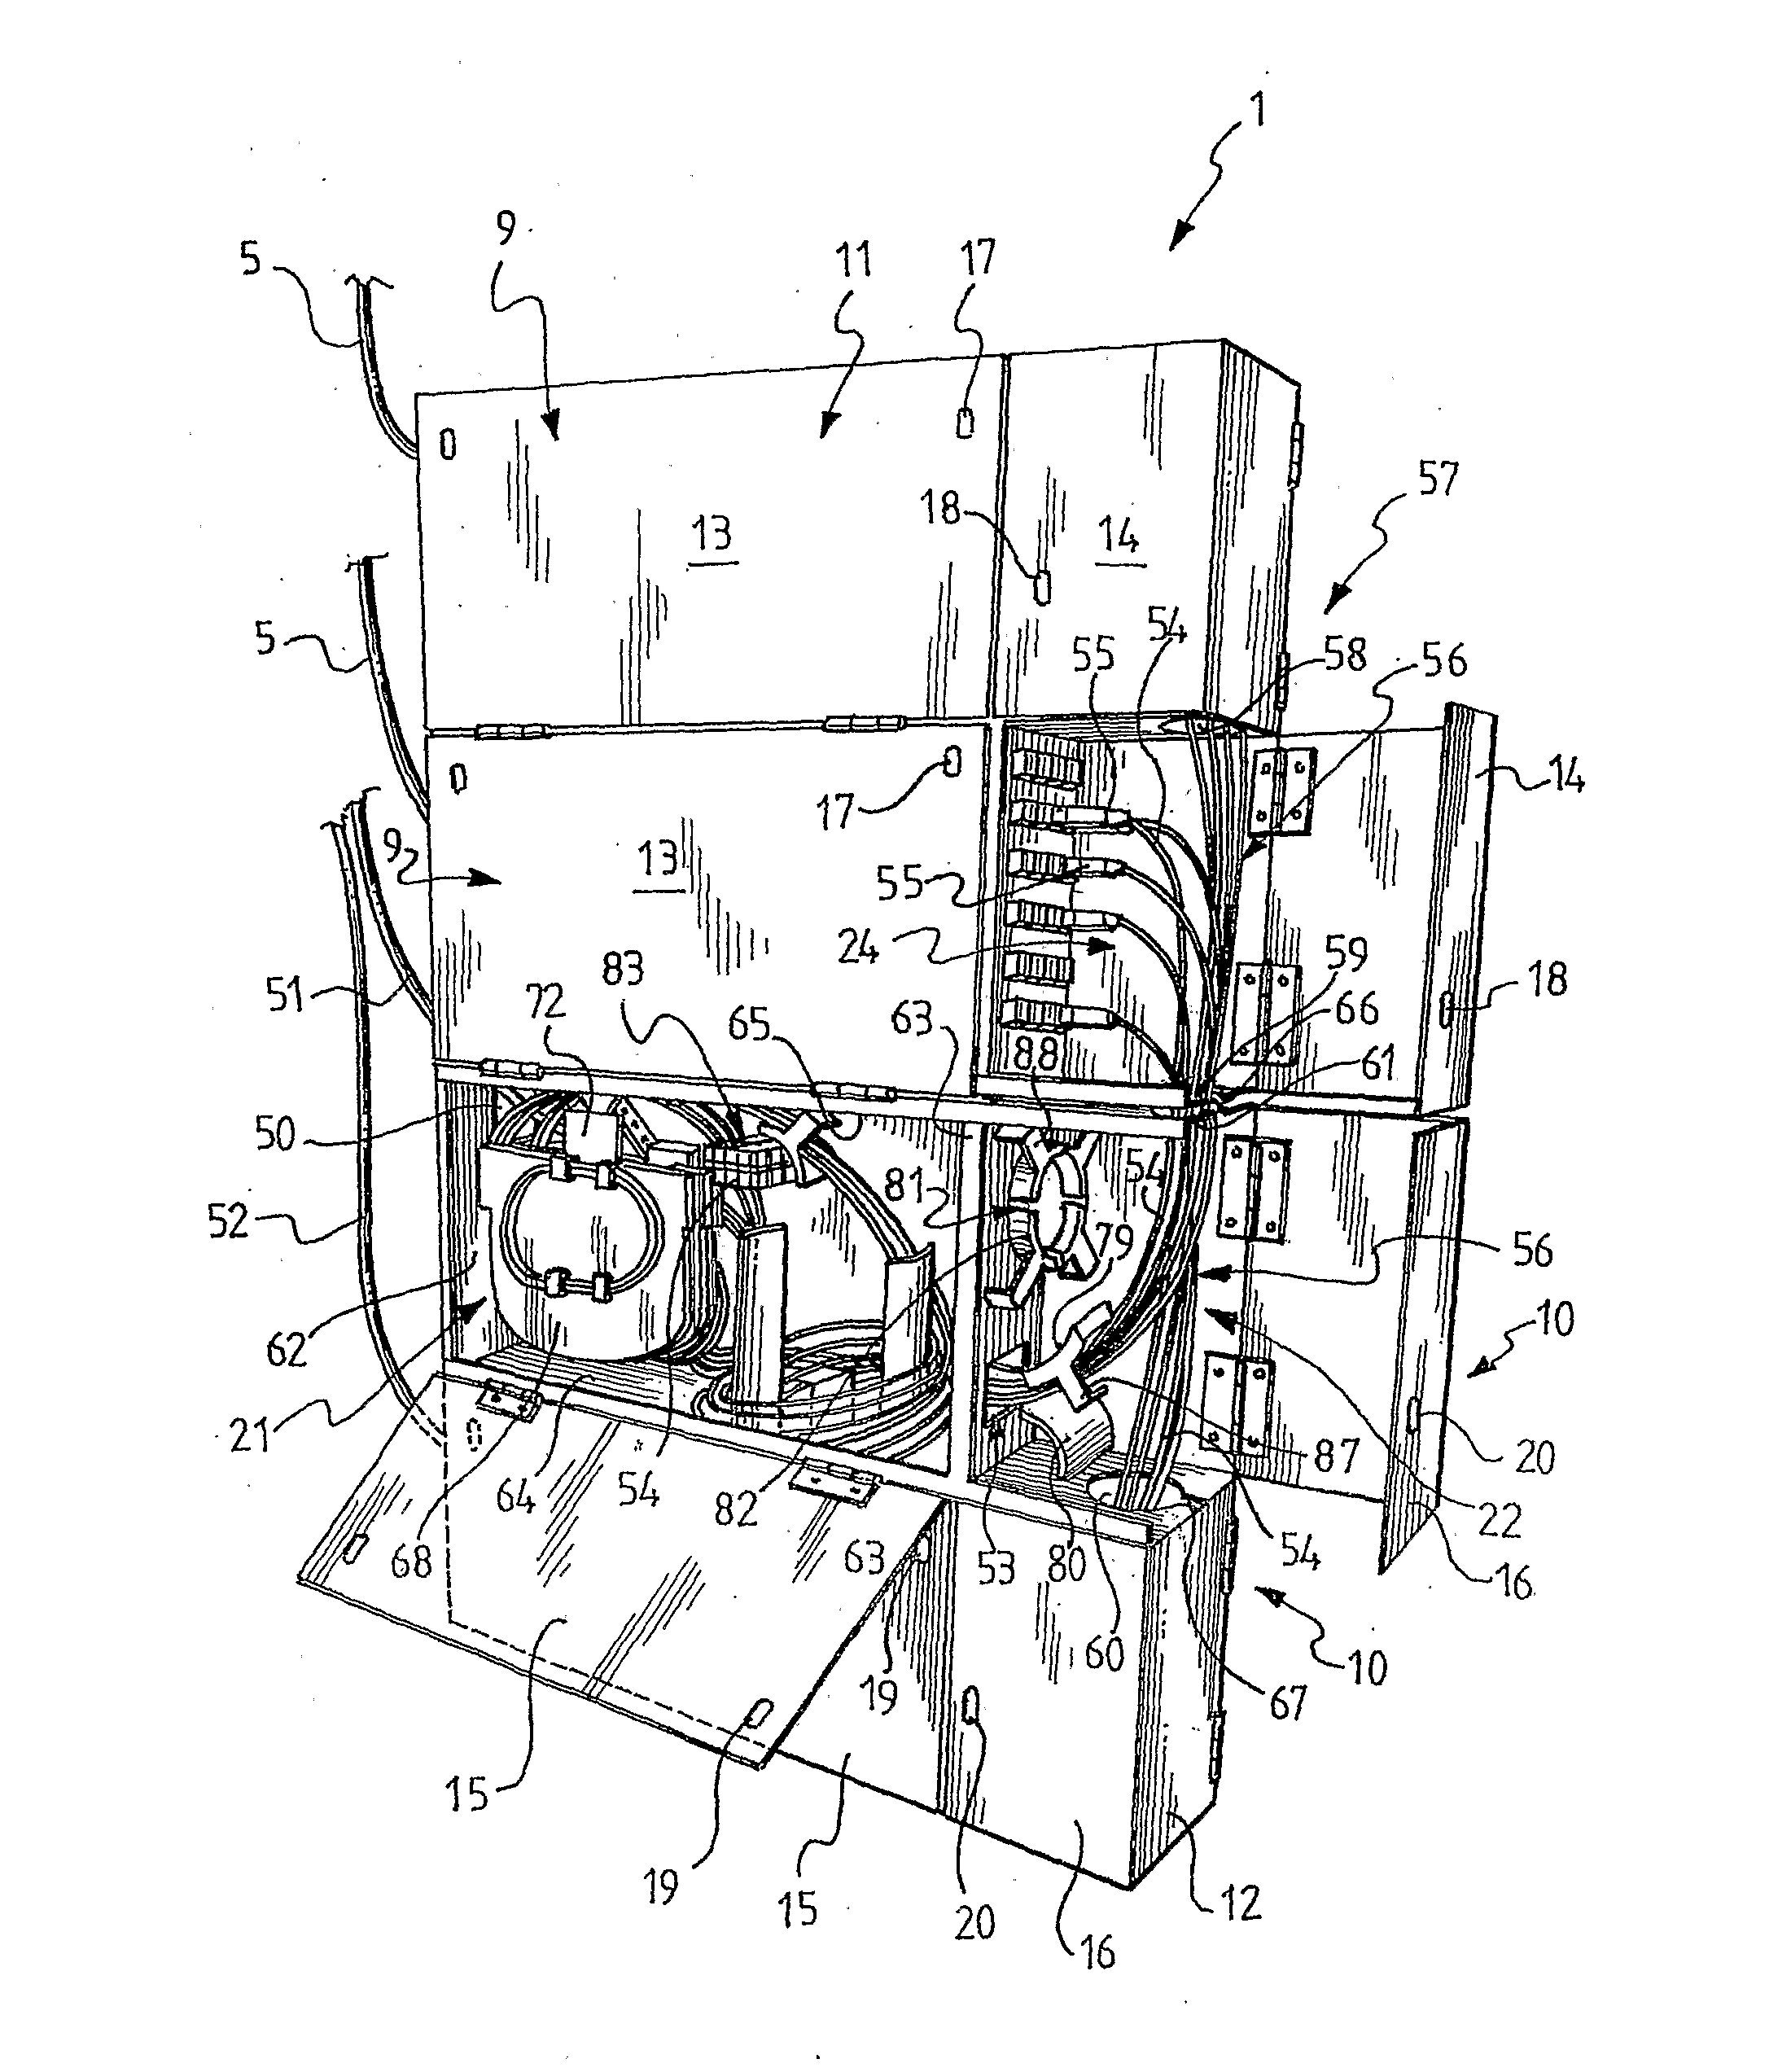 Modular system and methods for connecting an external communication network to a user network of a building